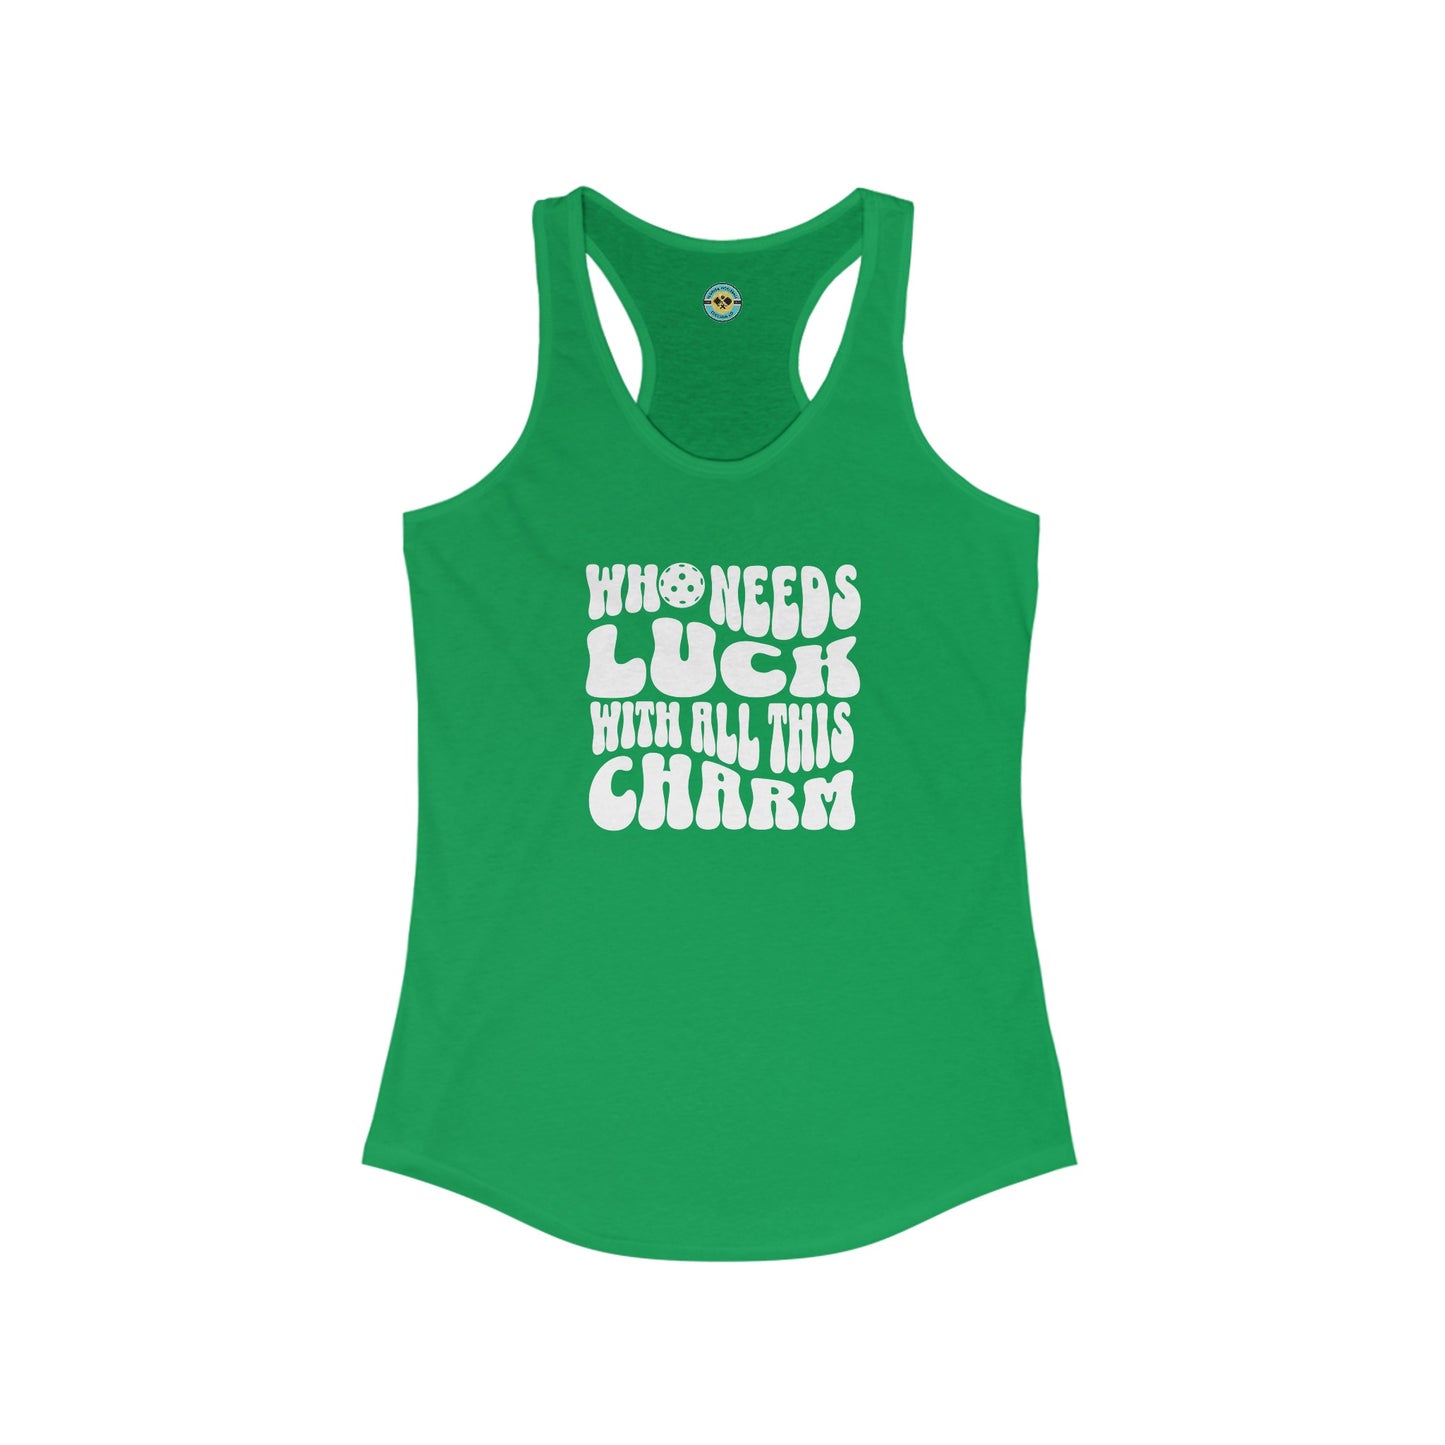 Who Needs Luck With All This Charm Women's Racerback Tank